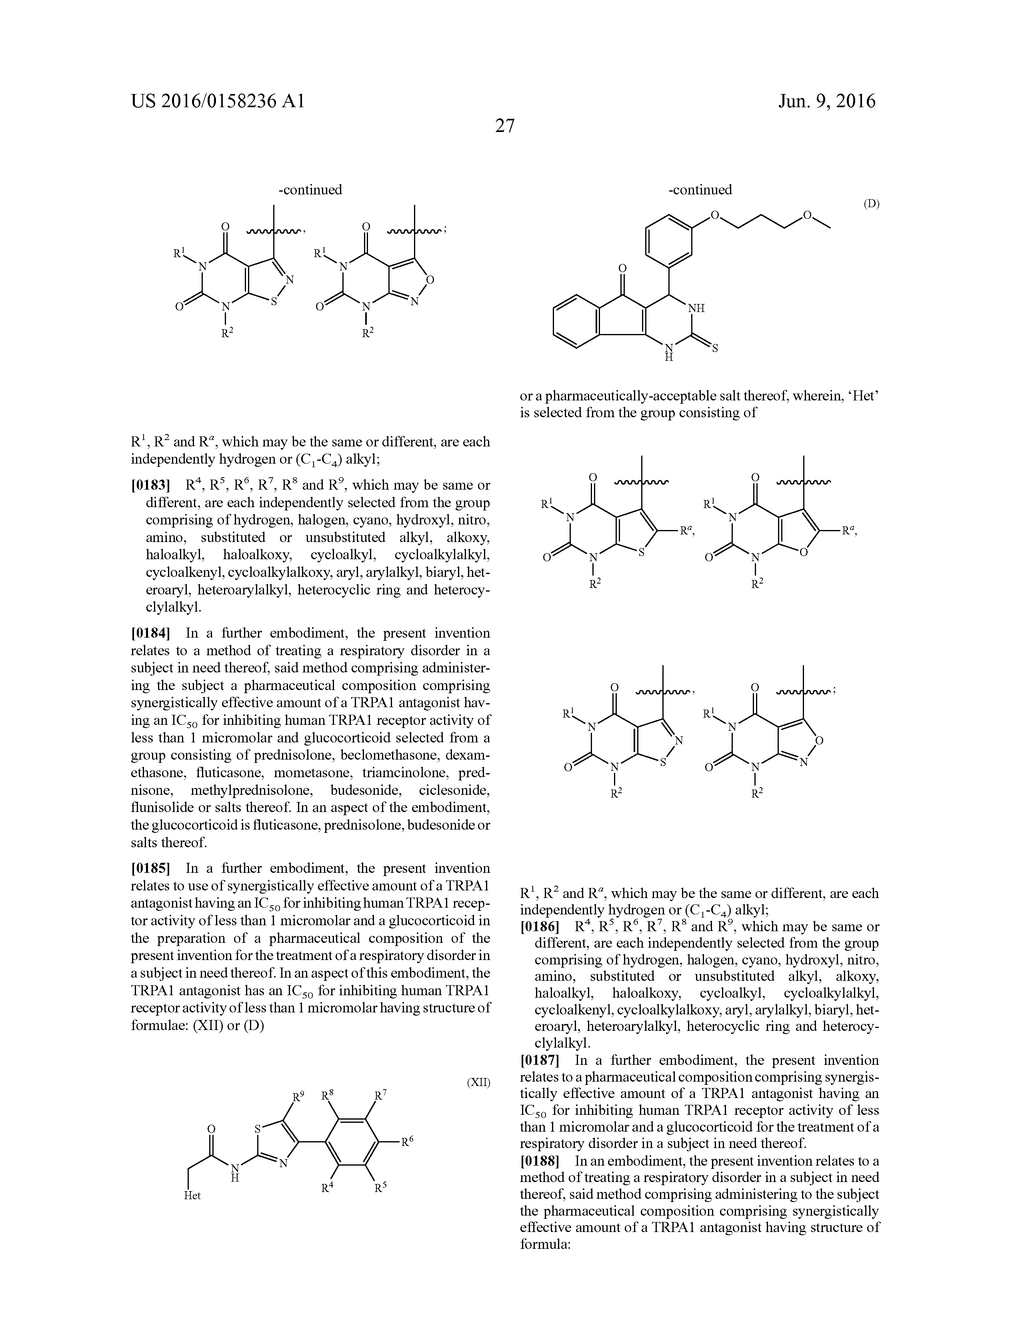 PHARMACEUTICAL COMPOSITION COMPRISING A TRPA1 ANTAGONIST AND A STEROID - diagram, schematic, and image 34